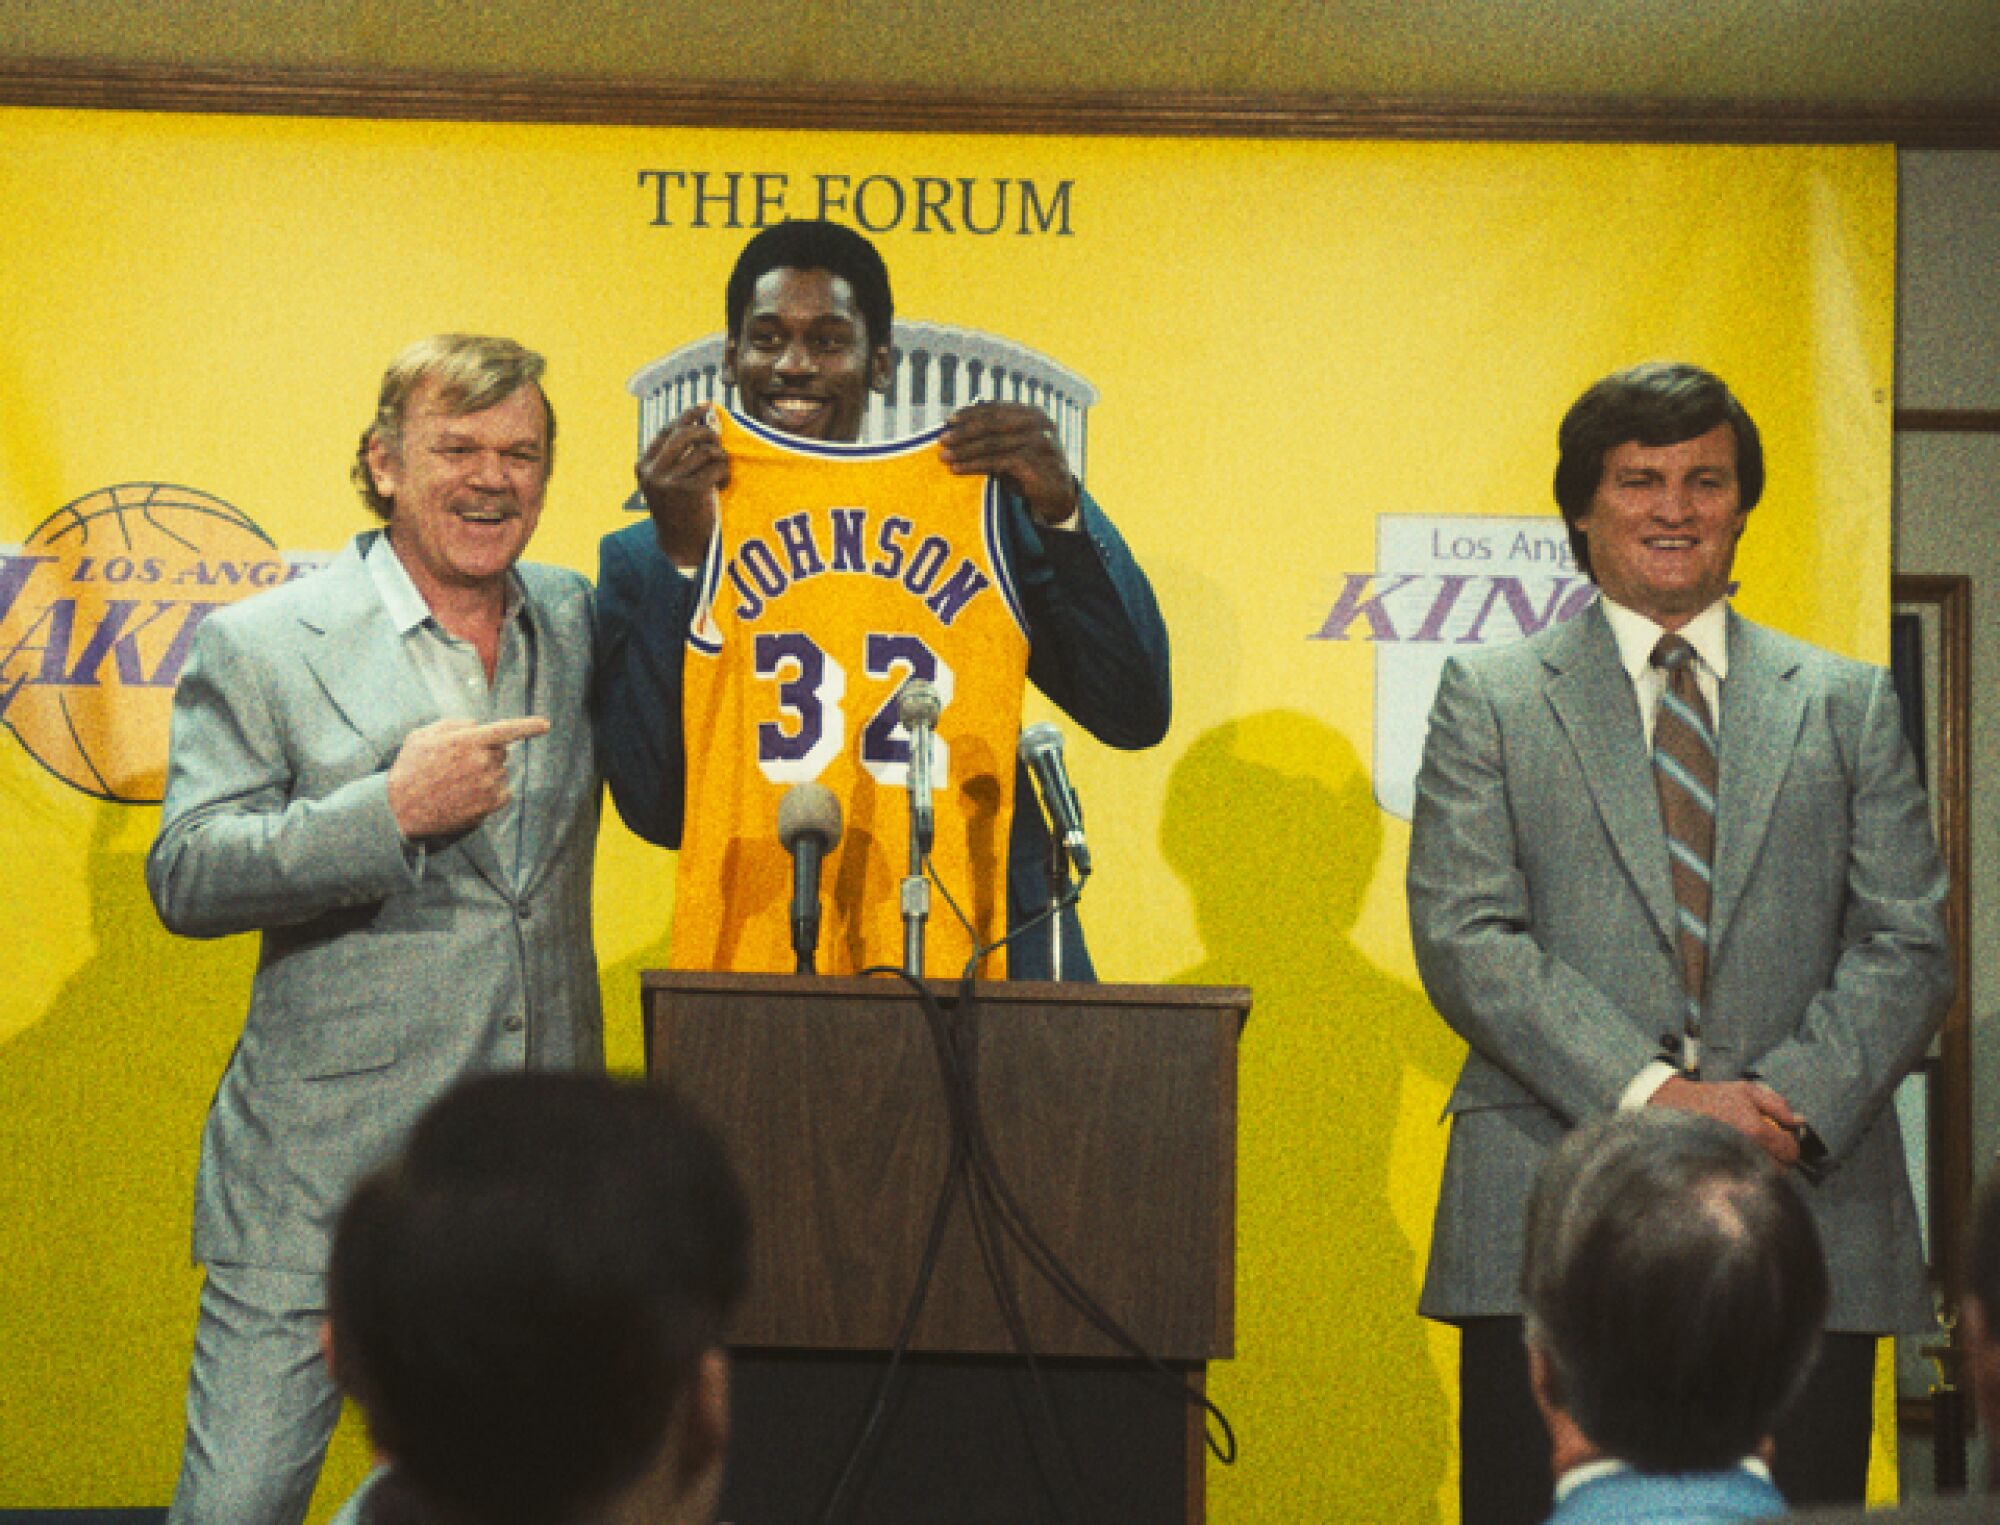 Three men hold a press conference before a yellow background